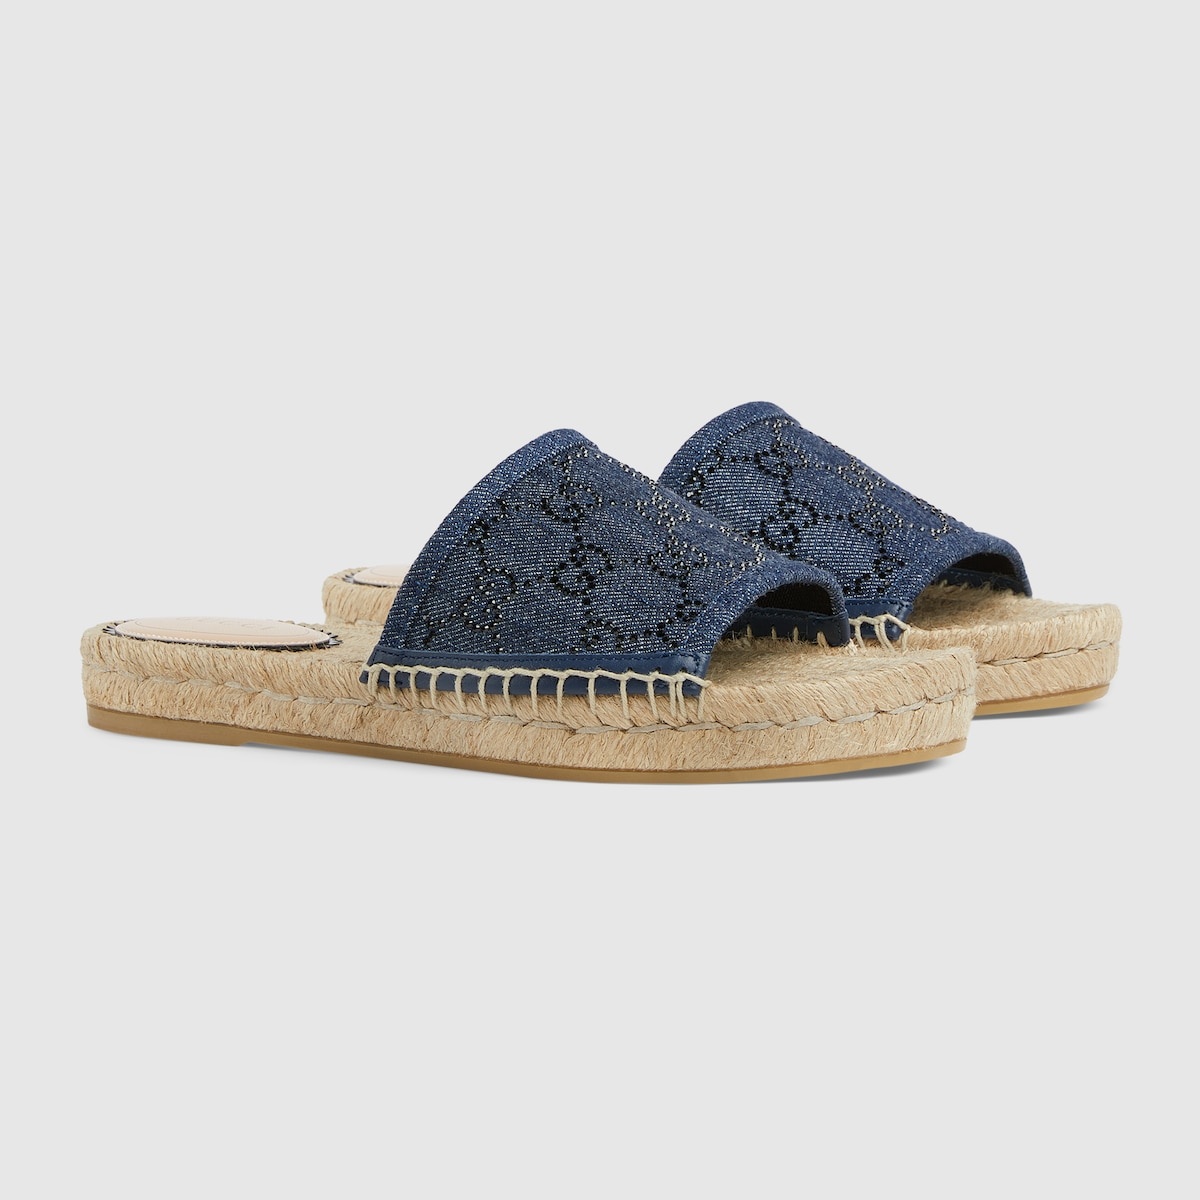 Women's slide espadrille with GG crystals - 2